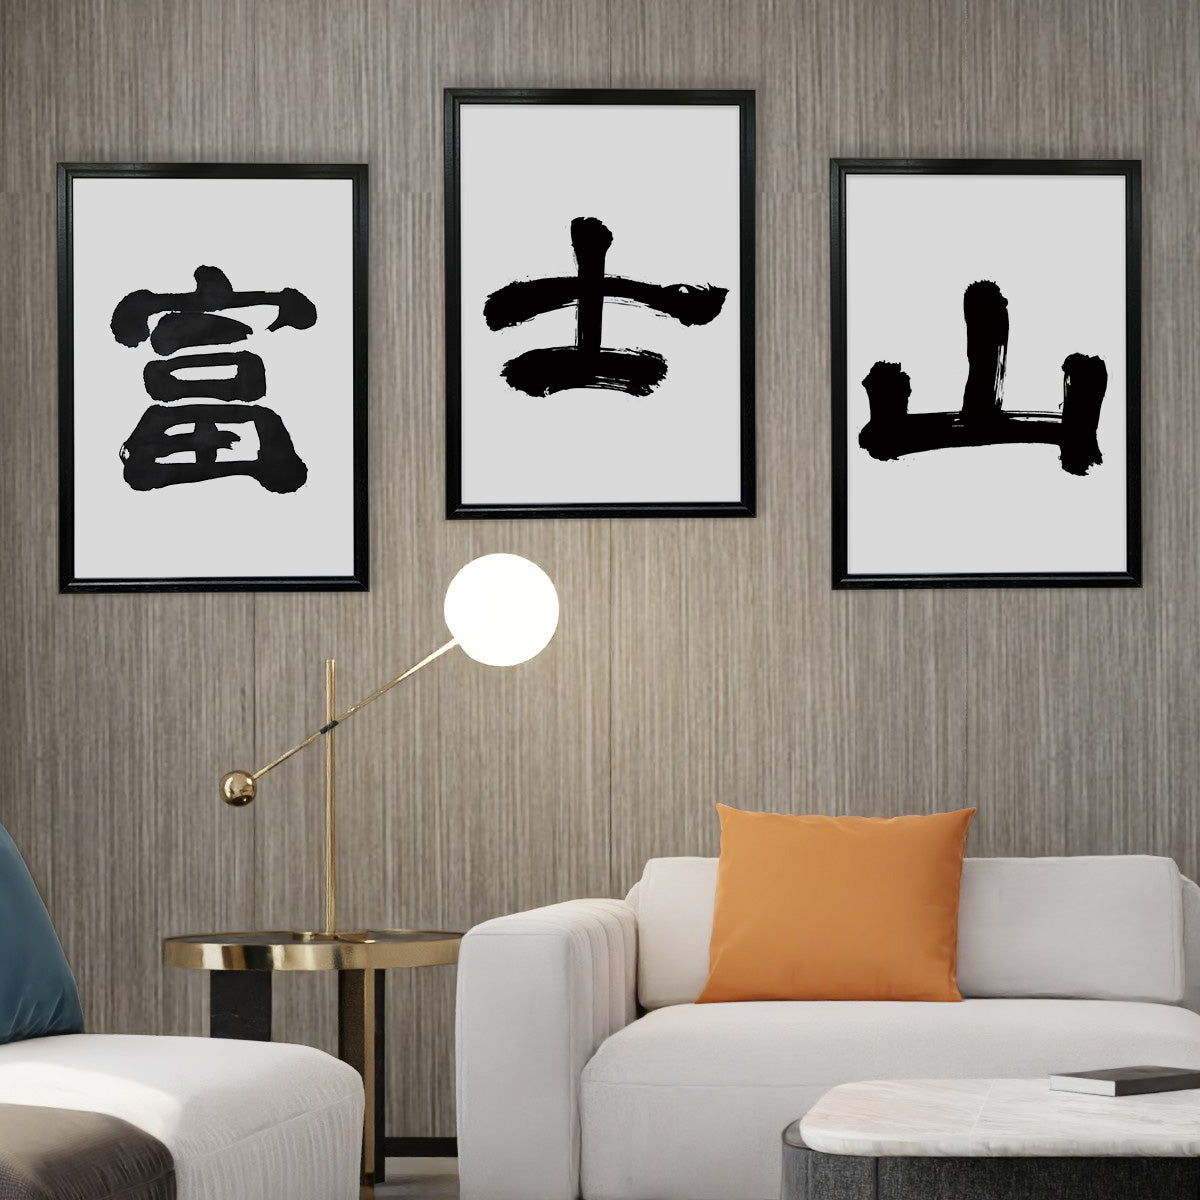 Japanese Calligraphy “Kanji Art Wall Art Japanese Paper Print Poster Made in Japan, Size A3,11.69 inch x 16.54 inch, Unframed FORTUNA Tokyo